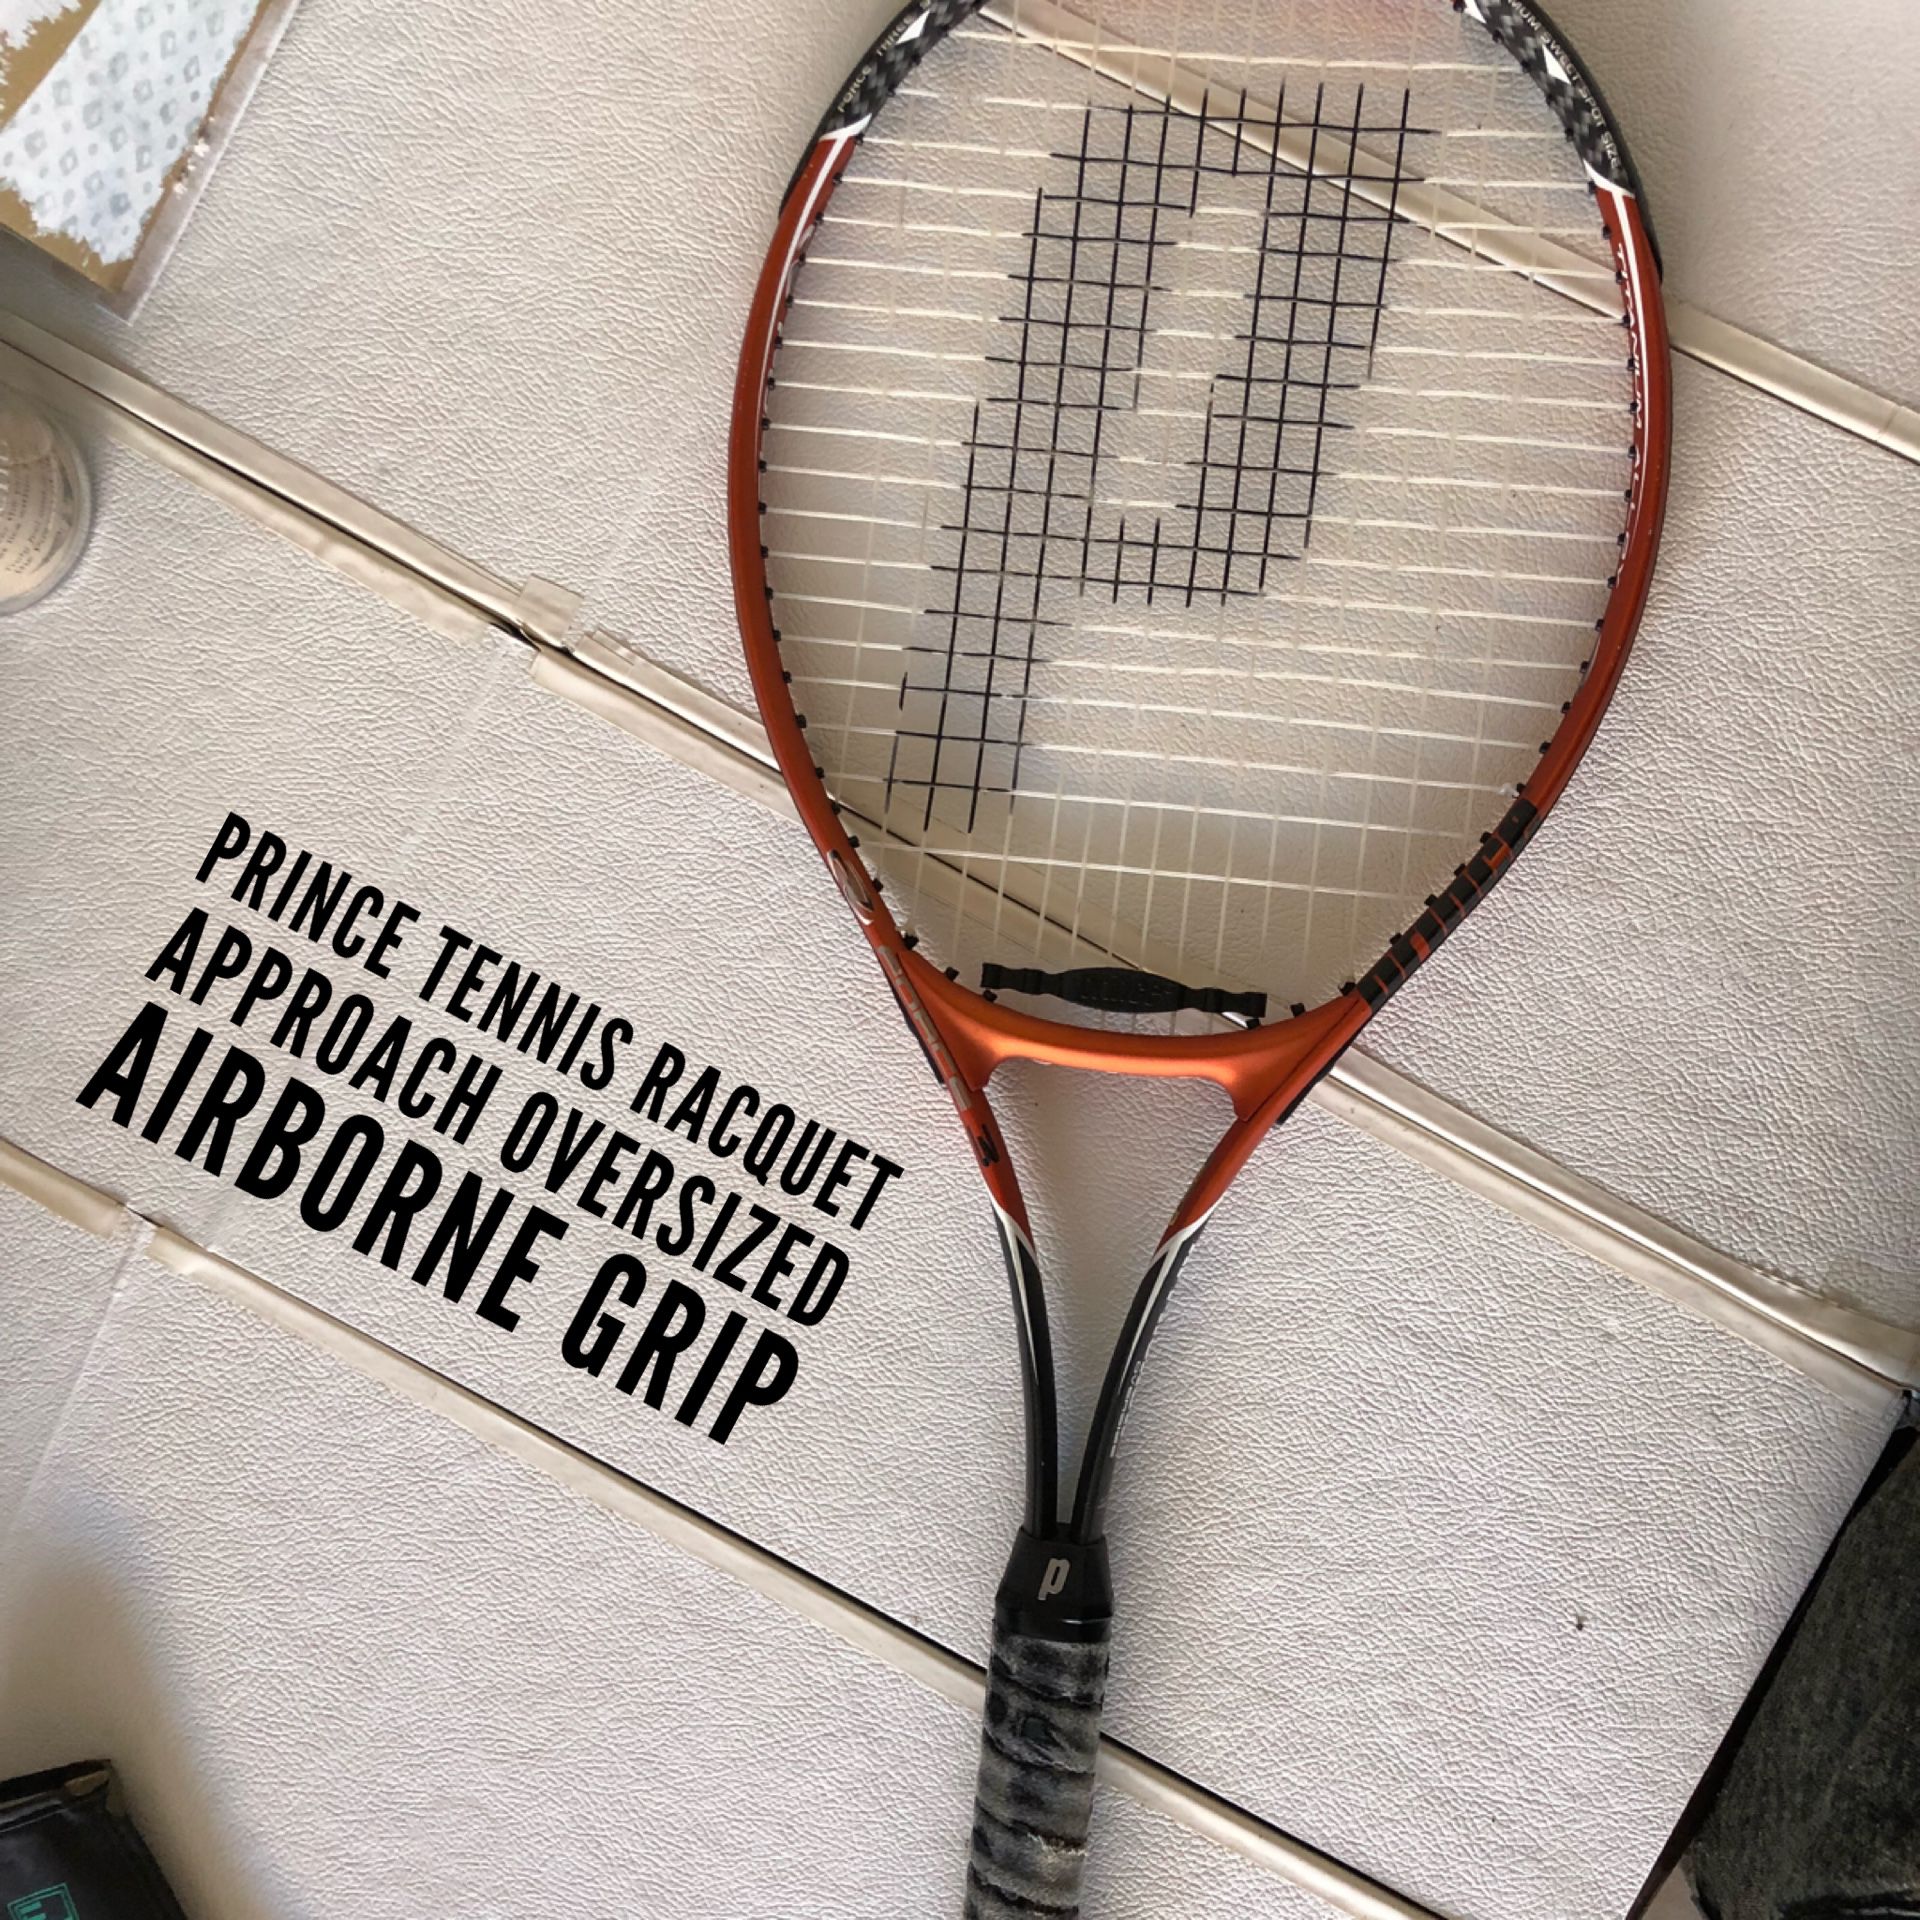 Good Prince Approach tennis racket - perfect for beginners and perfect Christmas gift